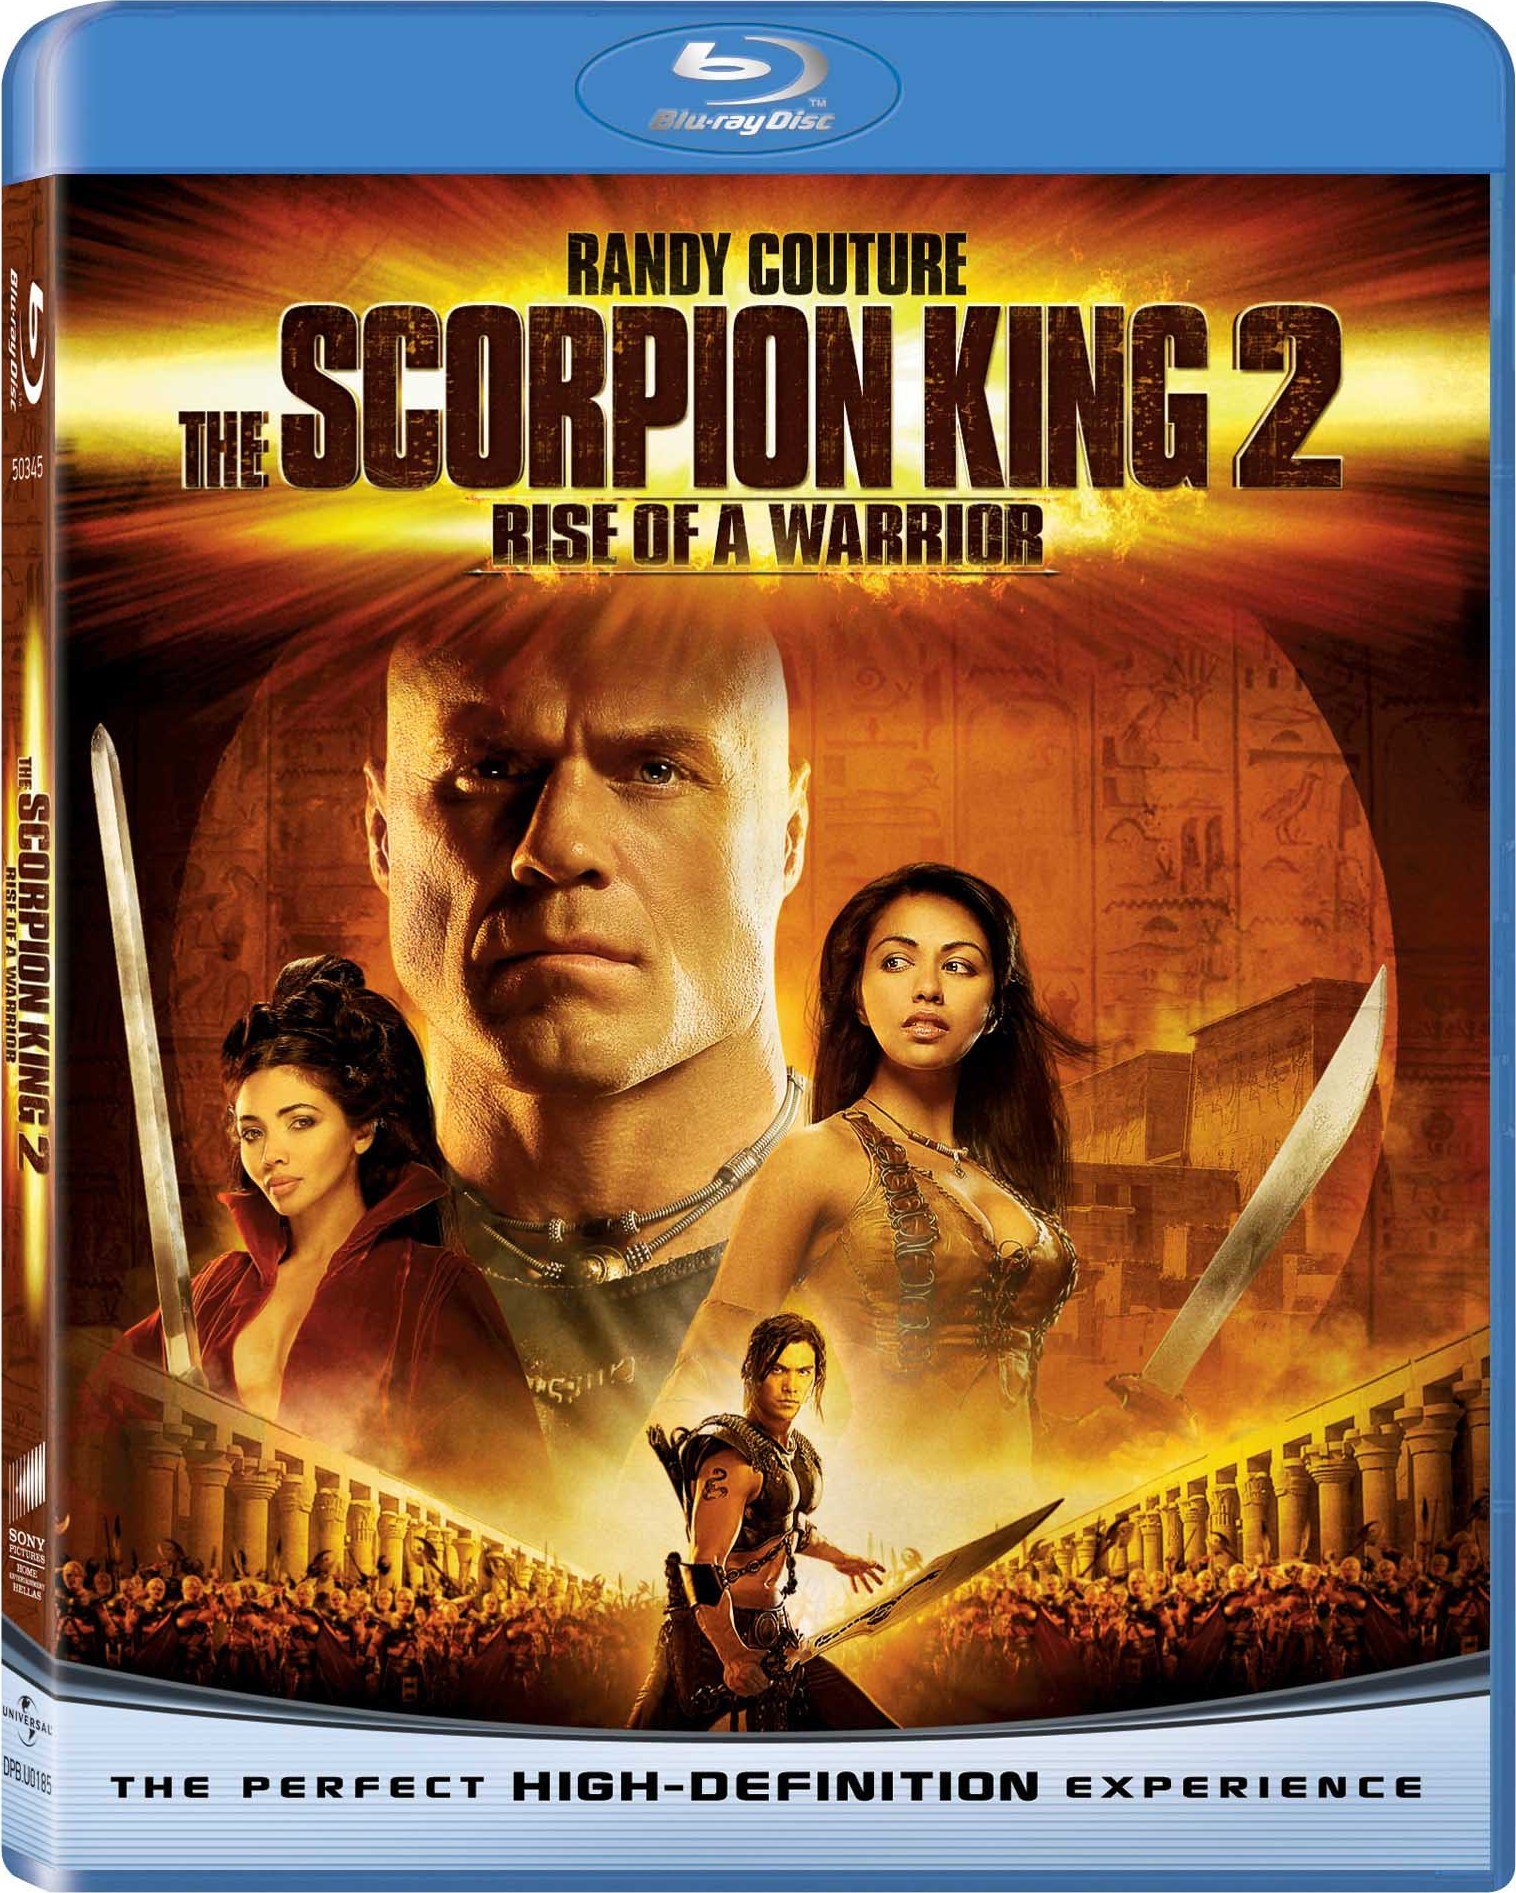 The Scorpion King 2 Full Movie Free Download